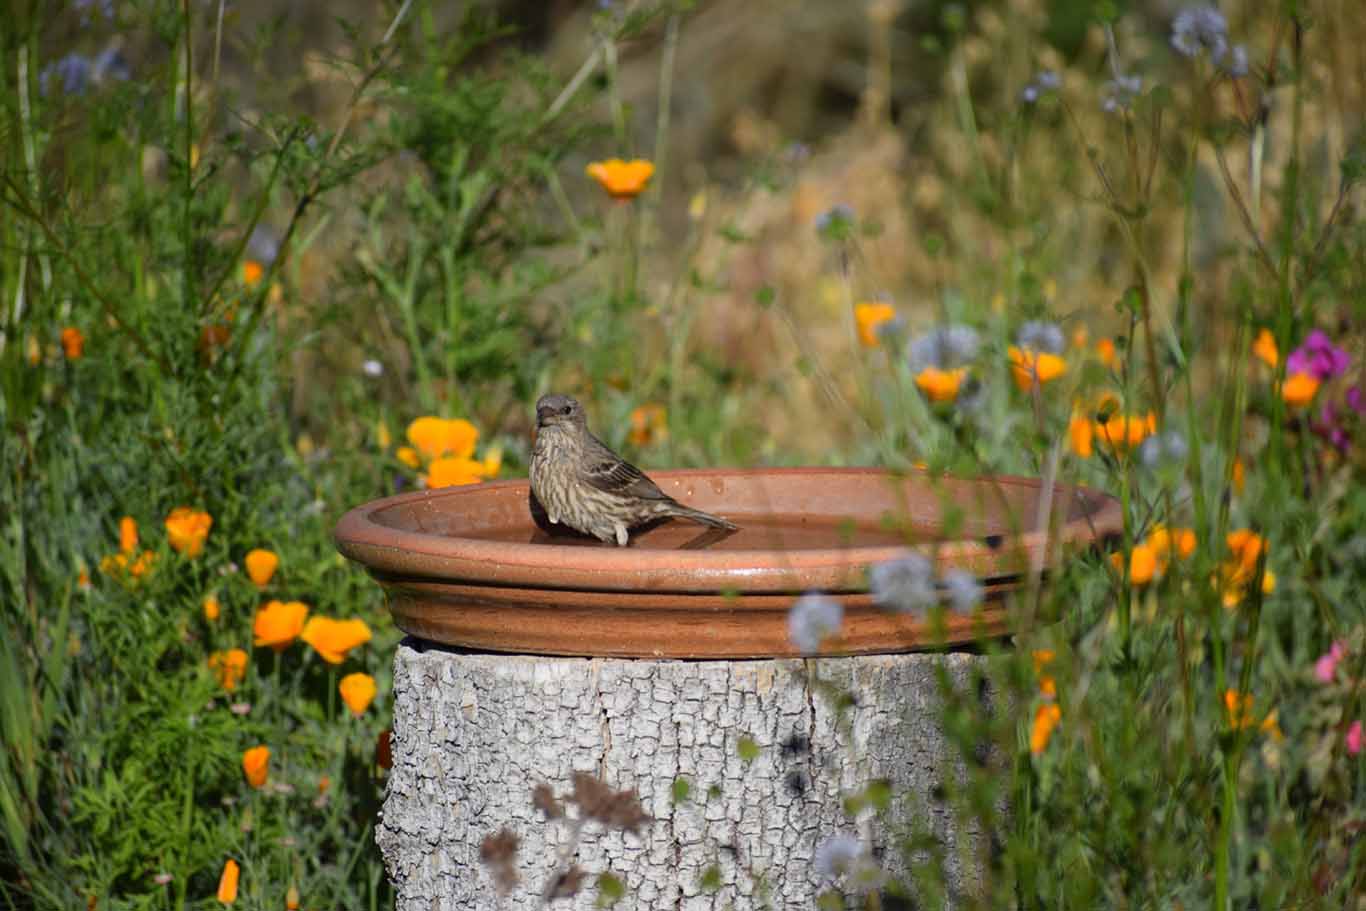 Sparrow with wildflowers